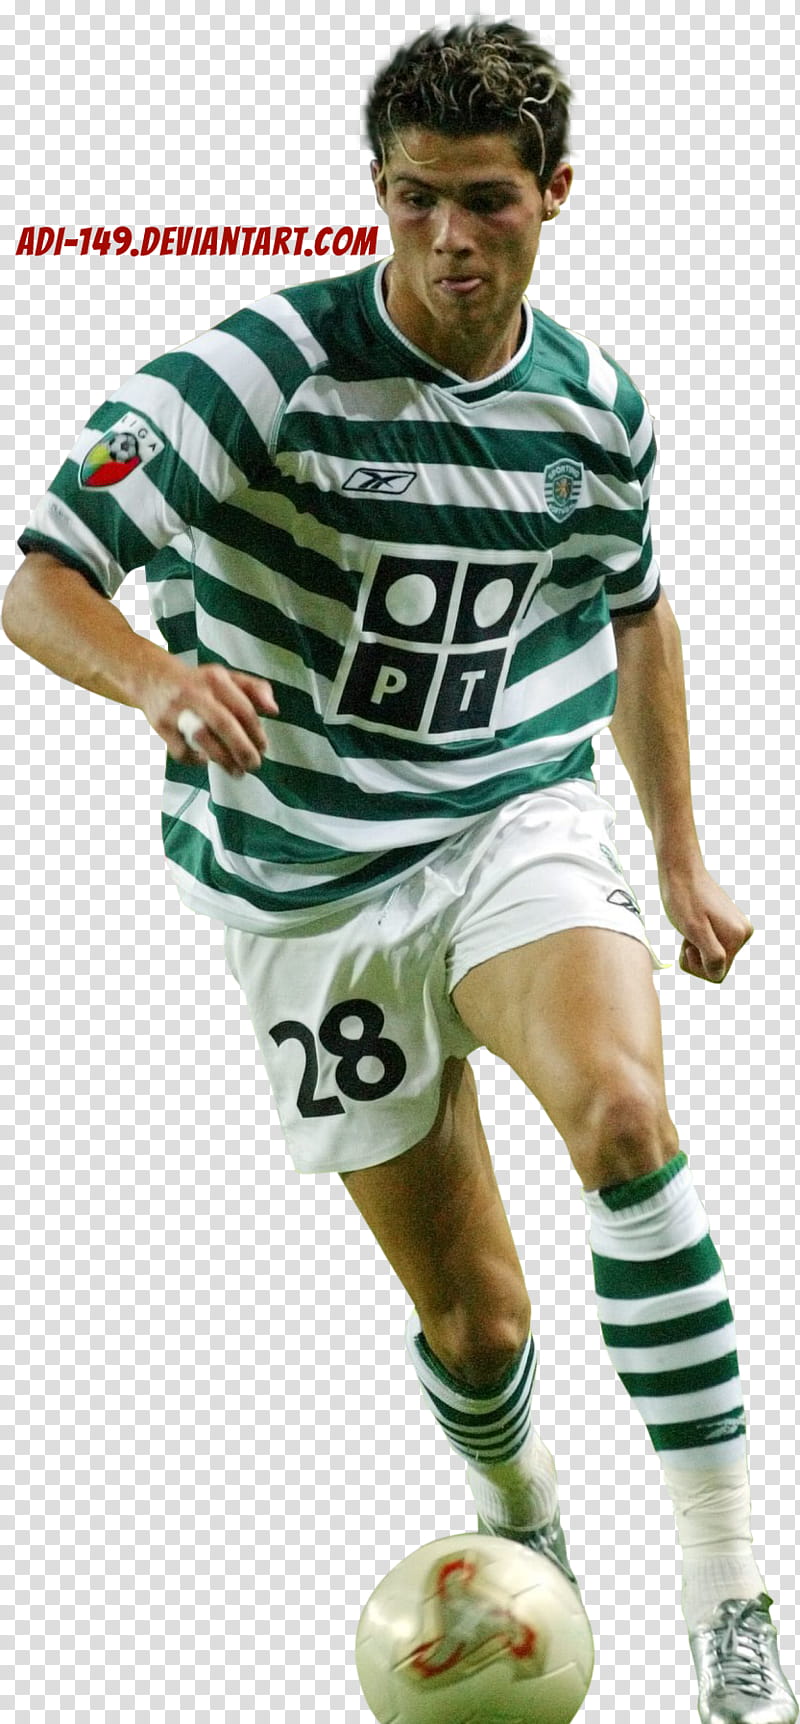 Cristiano Ronaldo Sporting CP Render transparent background PNG clipart